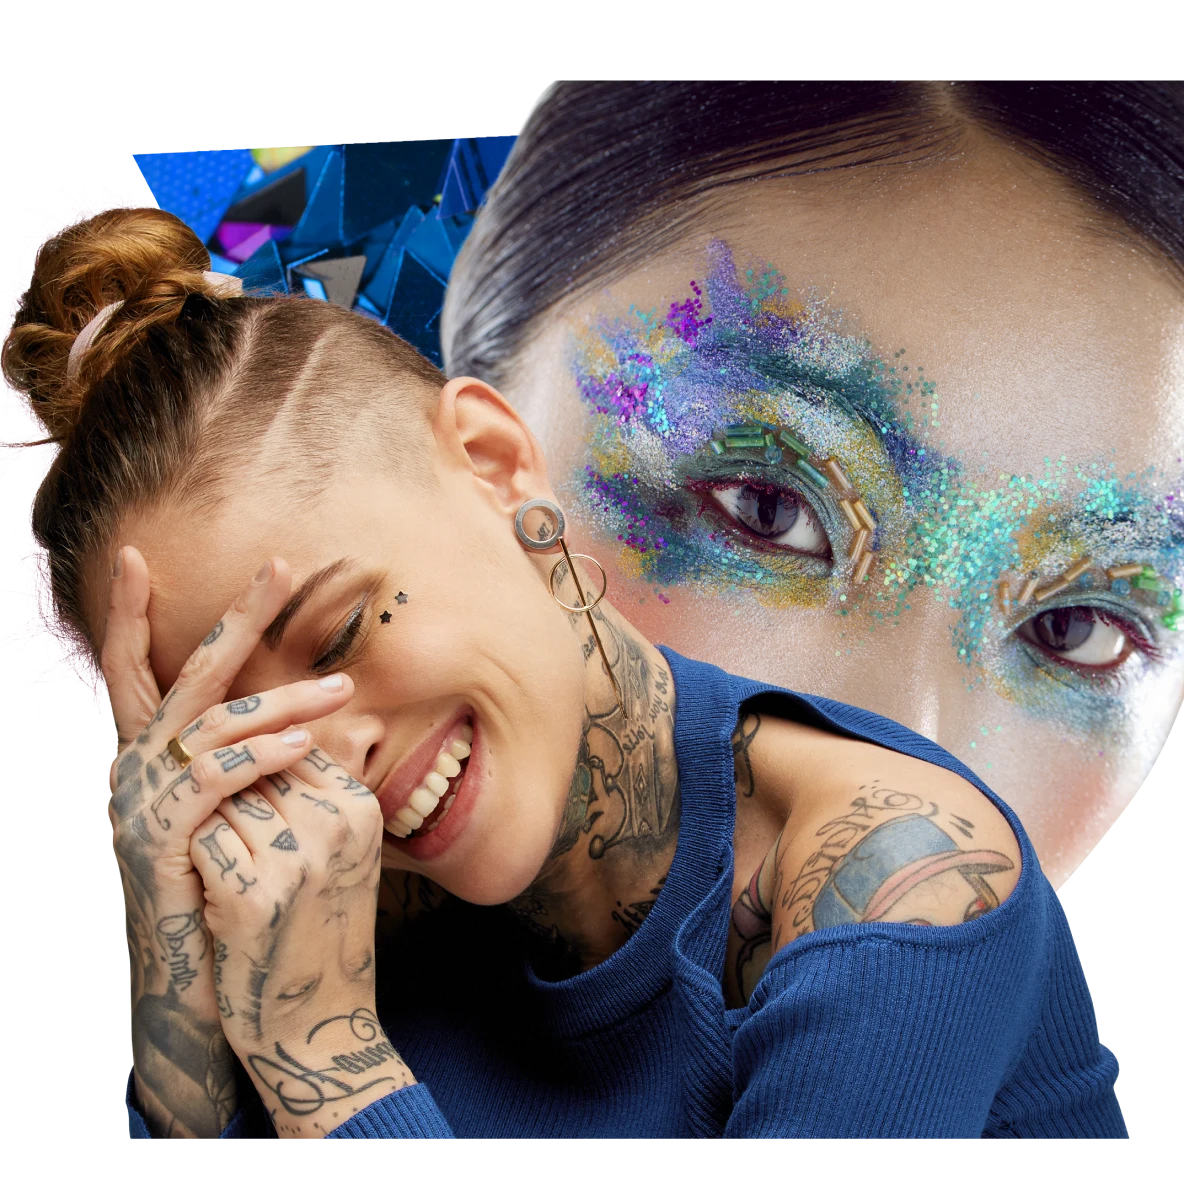 Woman with hand tattoos and top ponytail smiles, partially covering her face with her hands. Woman with vibrant blue eye makeup.